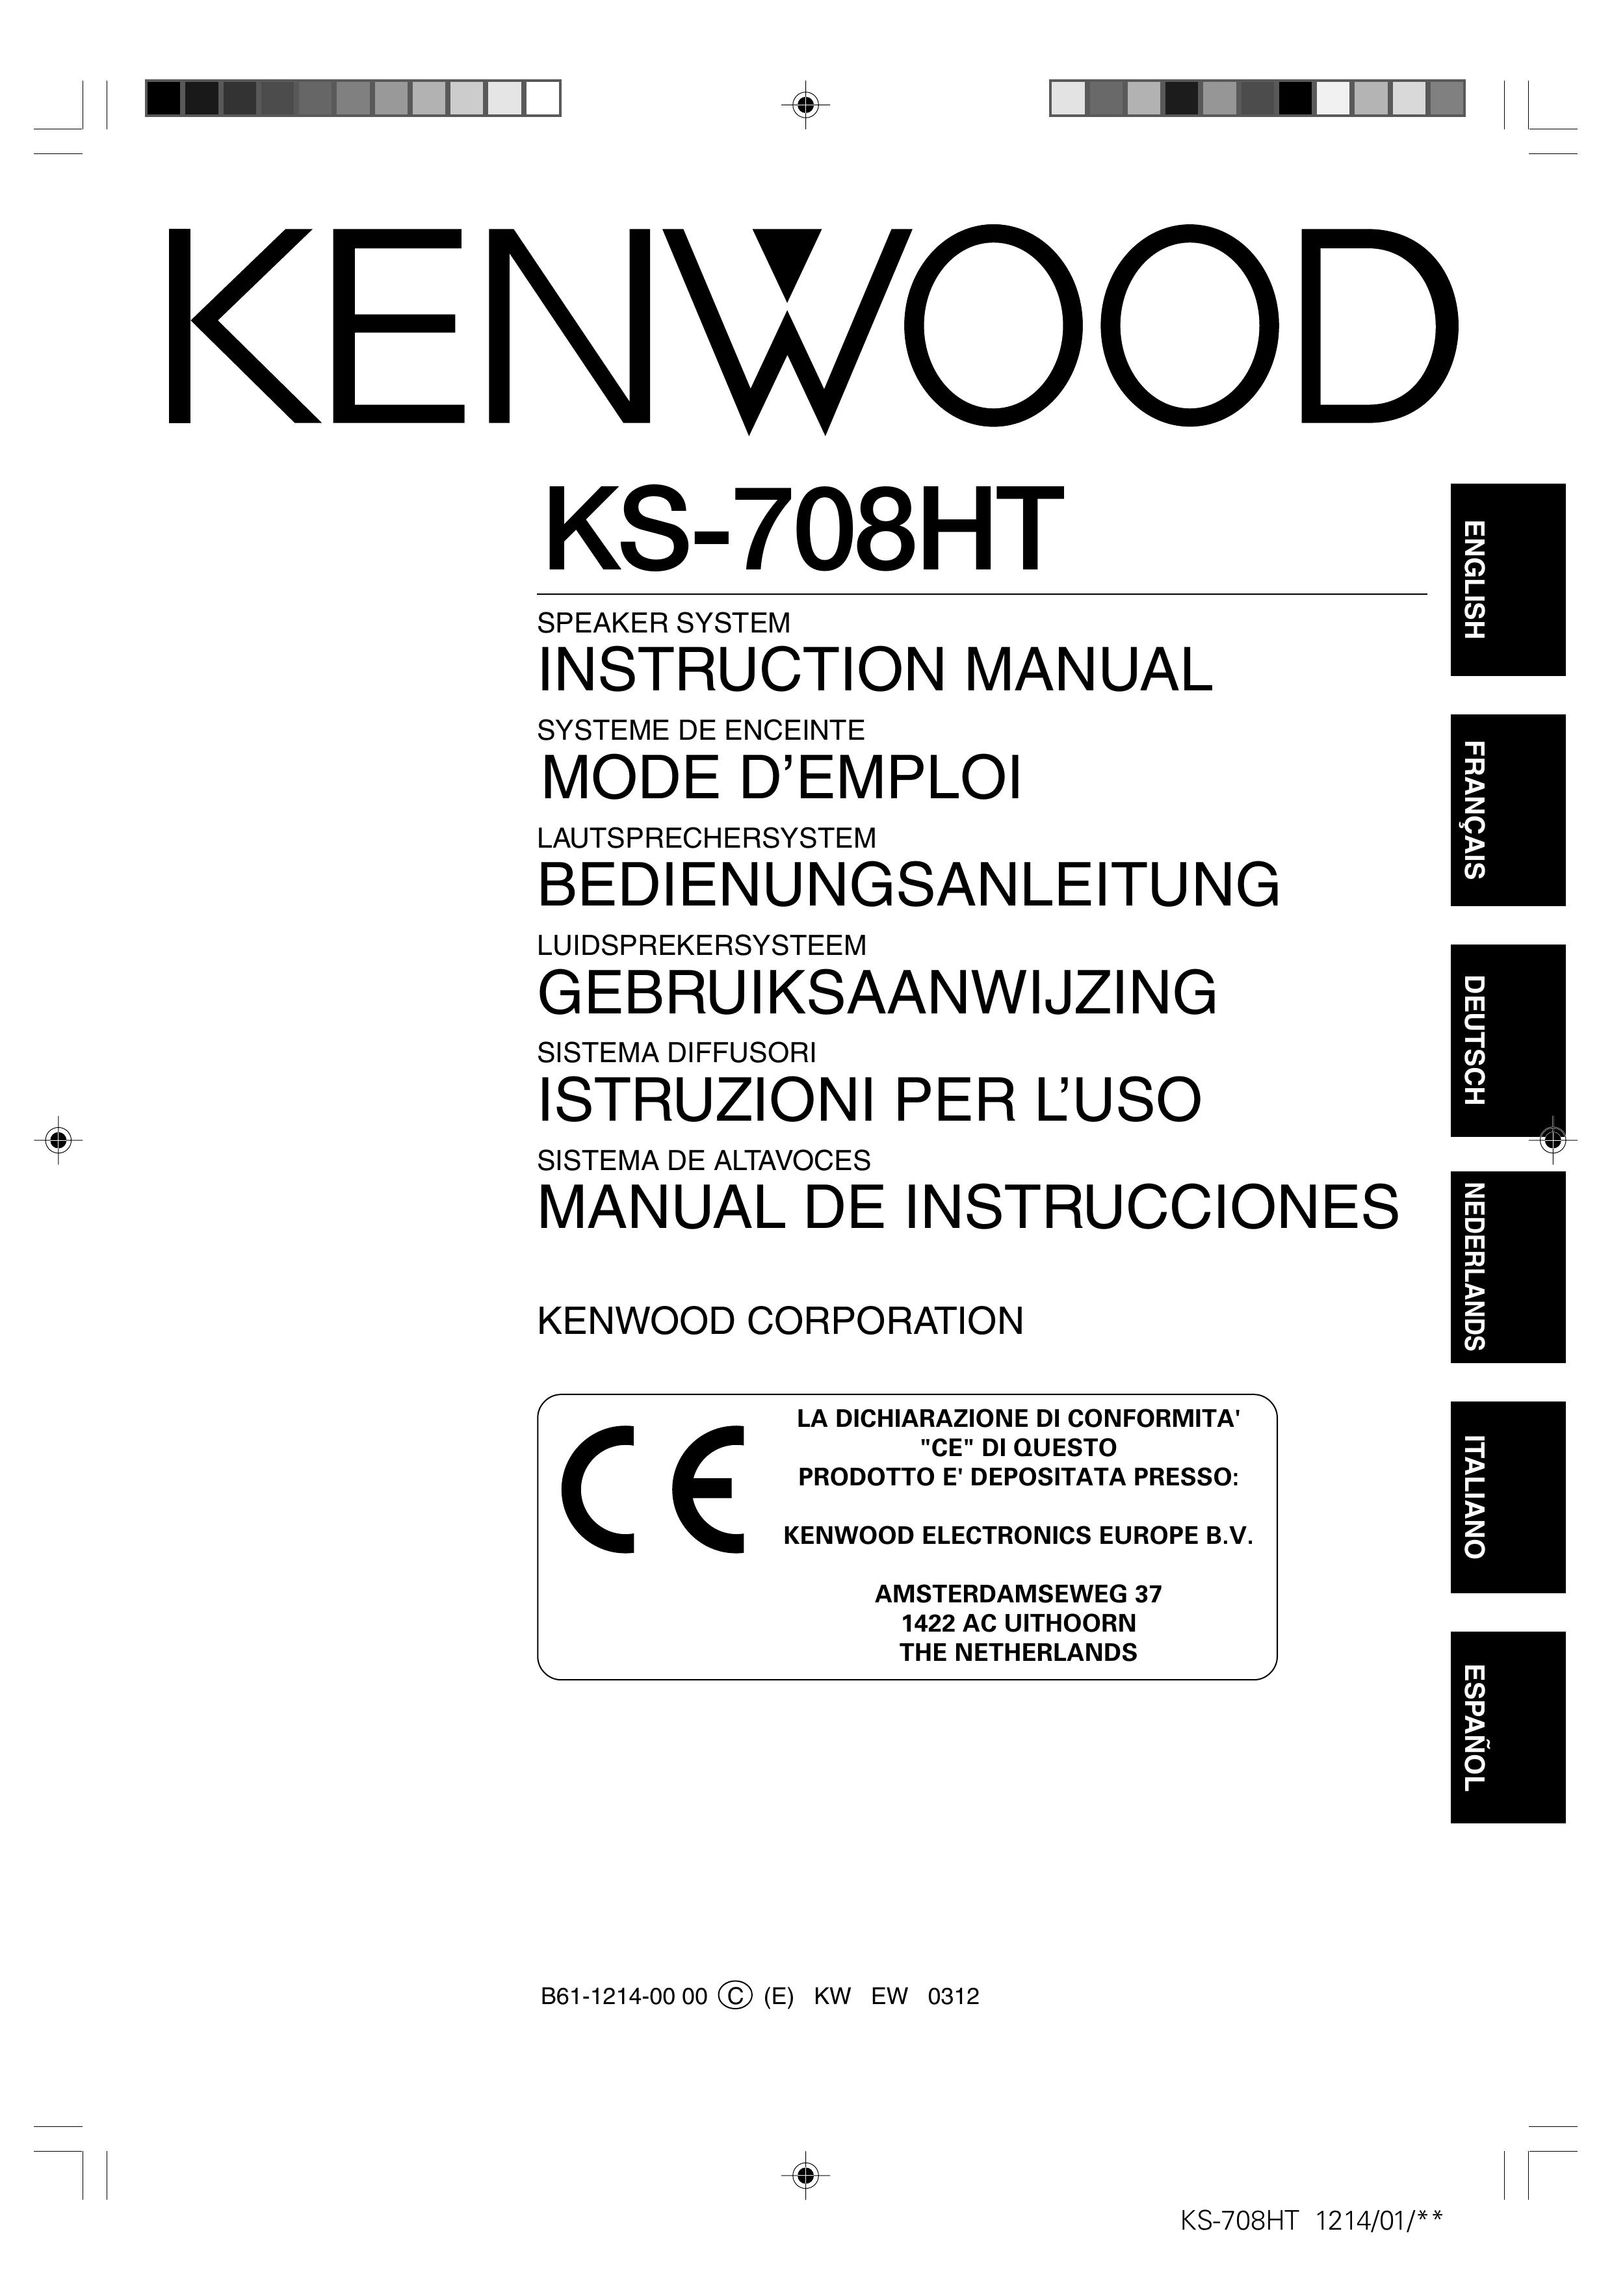 Kenwood KS-708HT Home Theater System User Manual